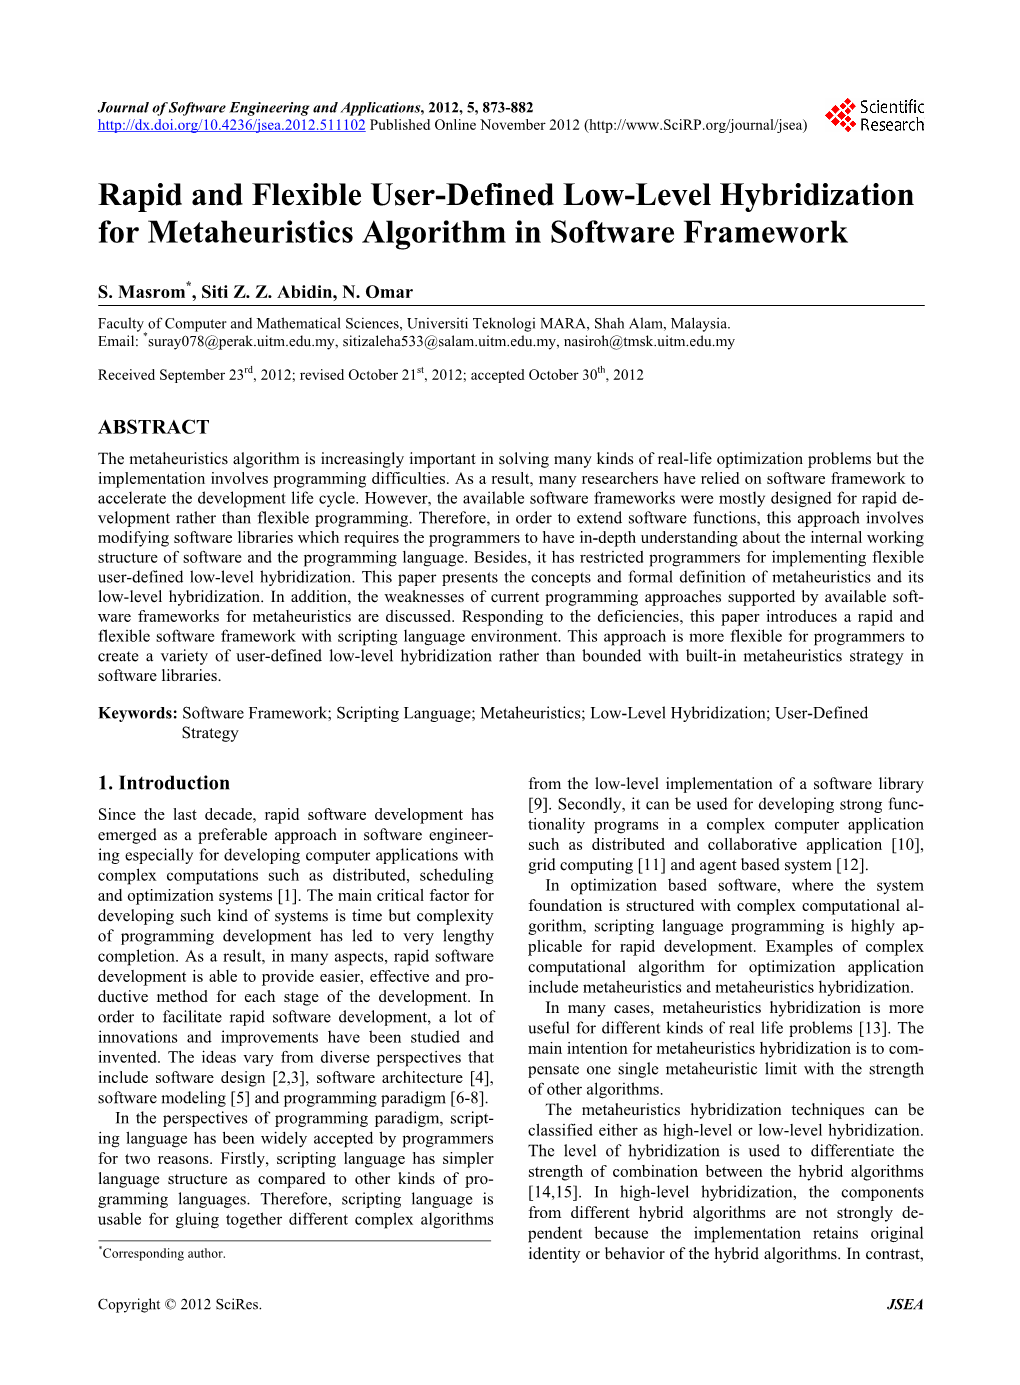 Rapid and Flexible User-Defined Low-Level Hybridization for Metaheuristics Algorithm in Software Framework